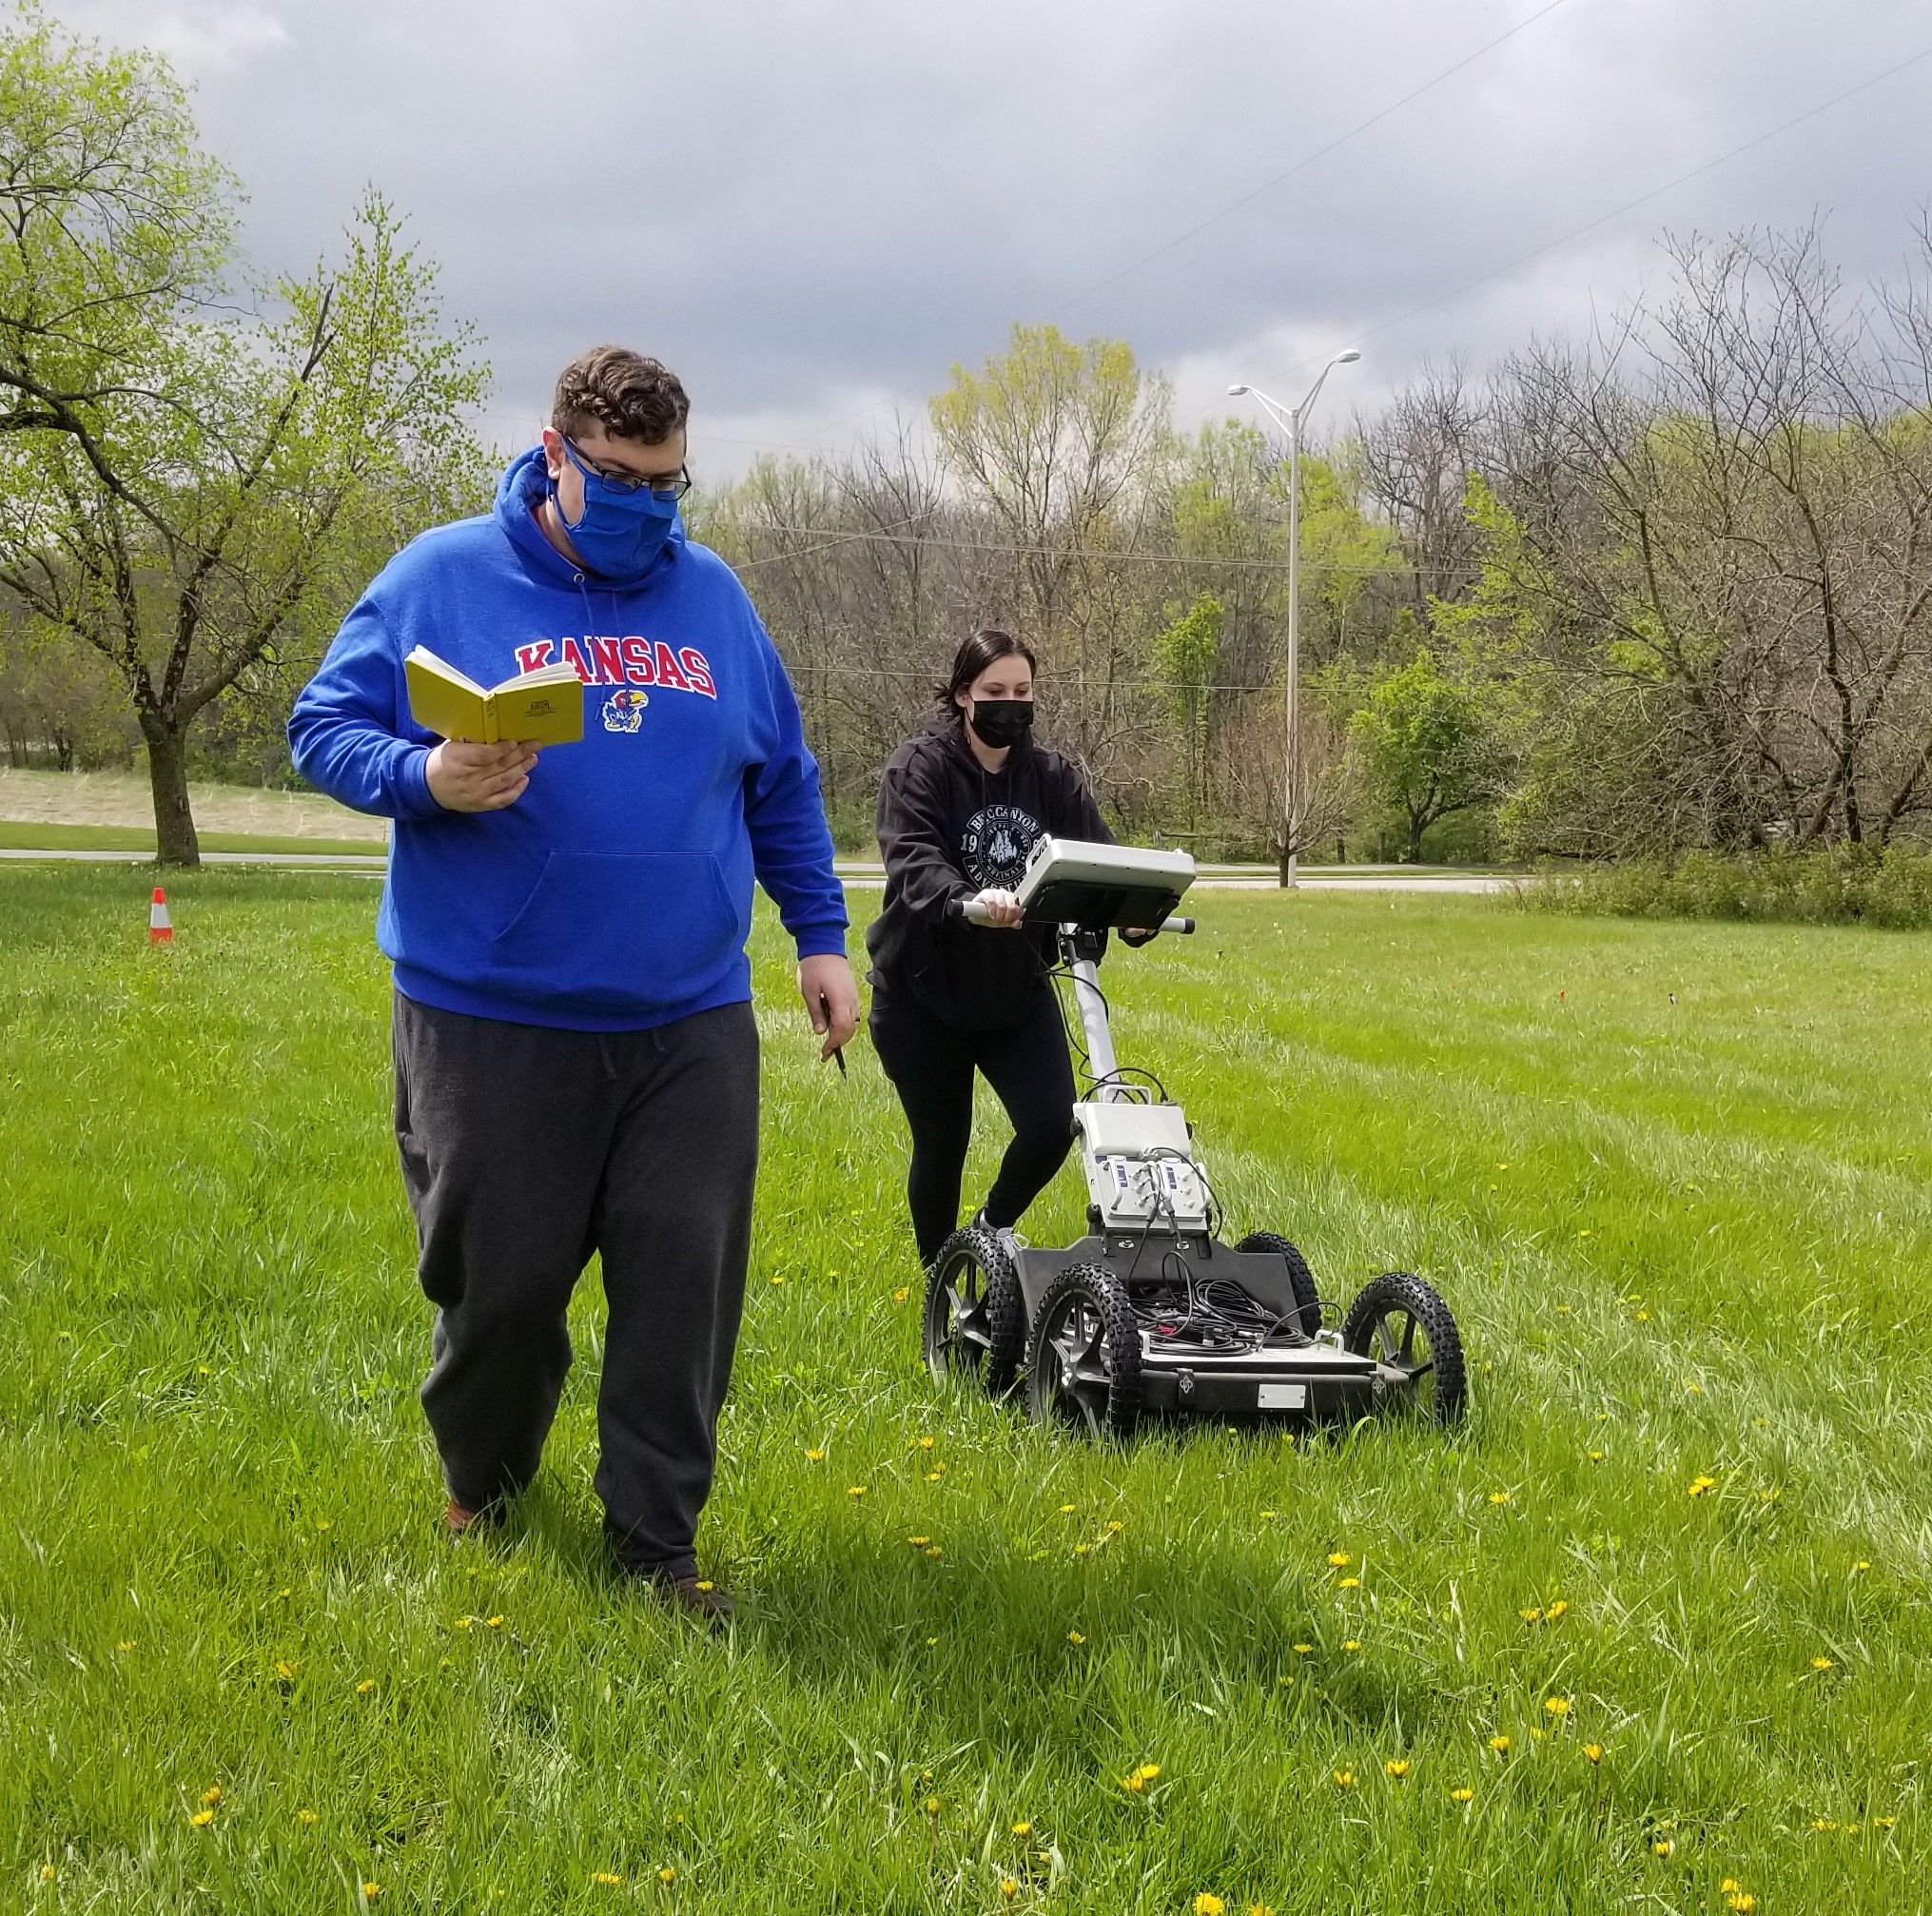 Will Swanson and Ali Vinke conduct a geophysical survey, using ground penetrating radar (GPR) to identify buried objects and geologic and hydrogeologic conditions in the ground’s subsurface during a workshop at the KU Edwards Campus on April 16.